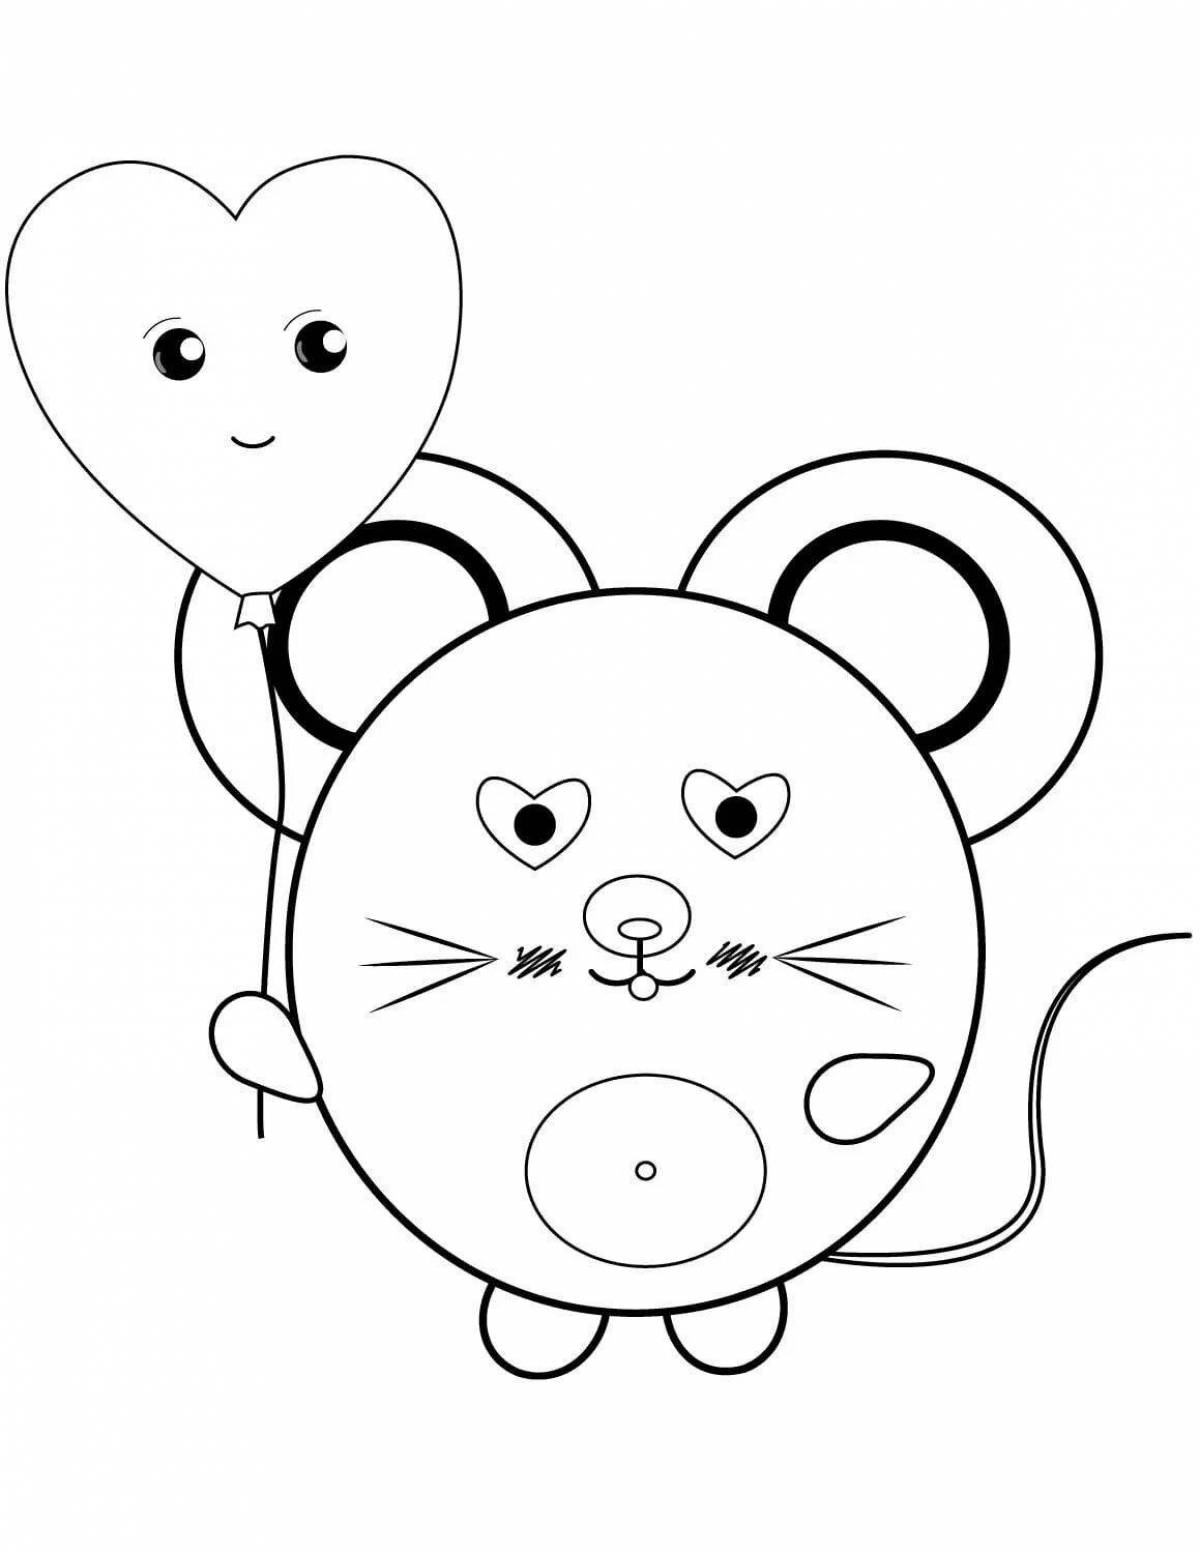 Naughty mouse coloring pages